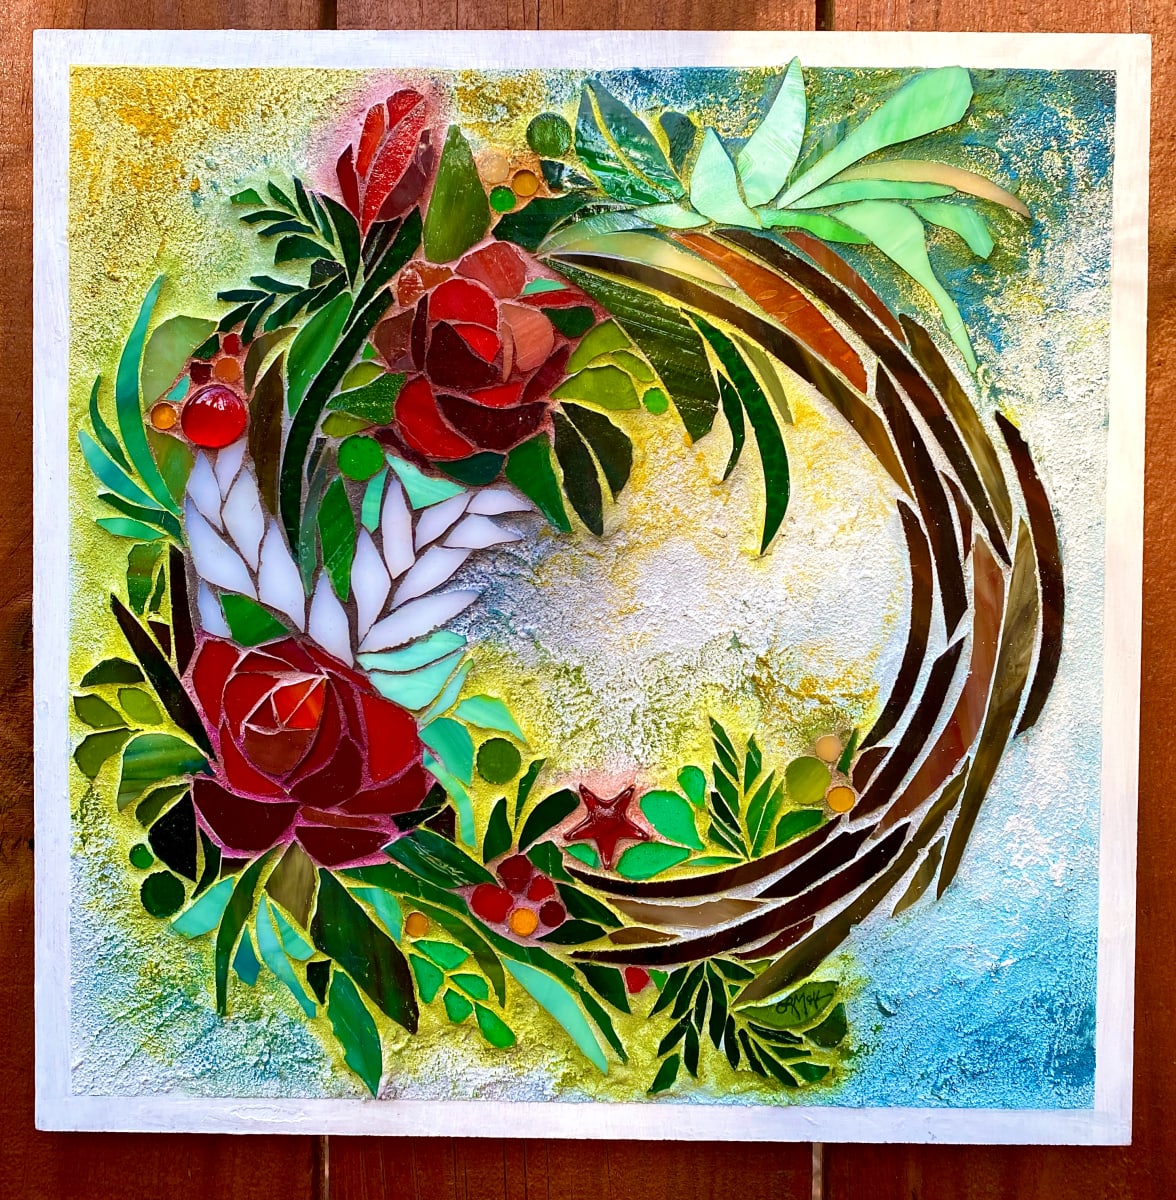 Yuletide by Laura McKellar  Image: A Christmas wreath in stained glass with painted grout.